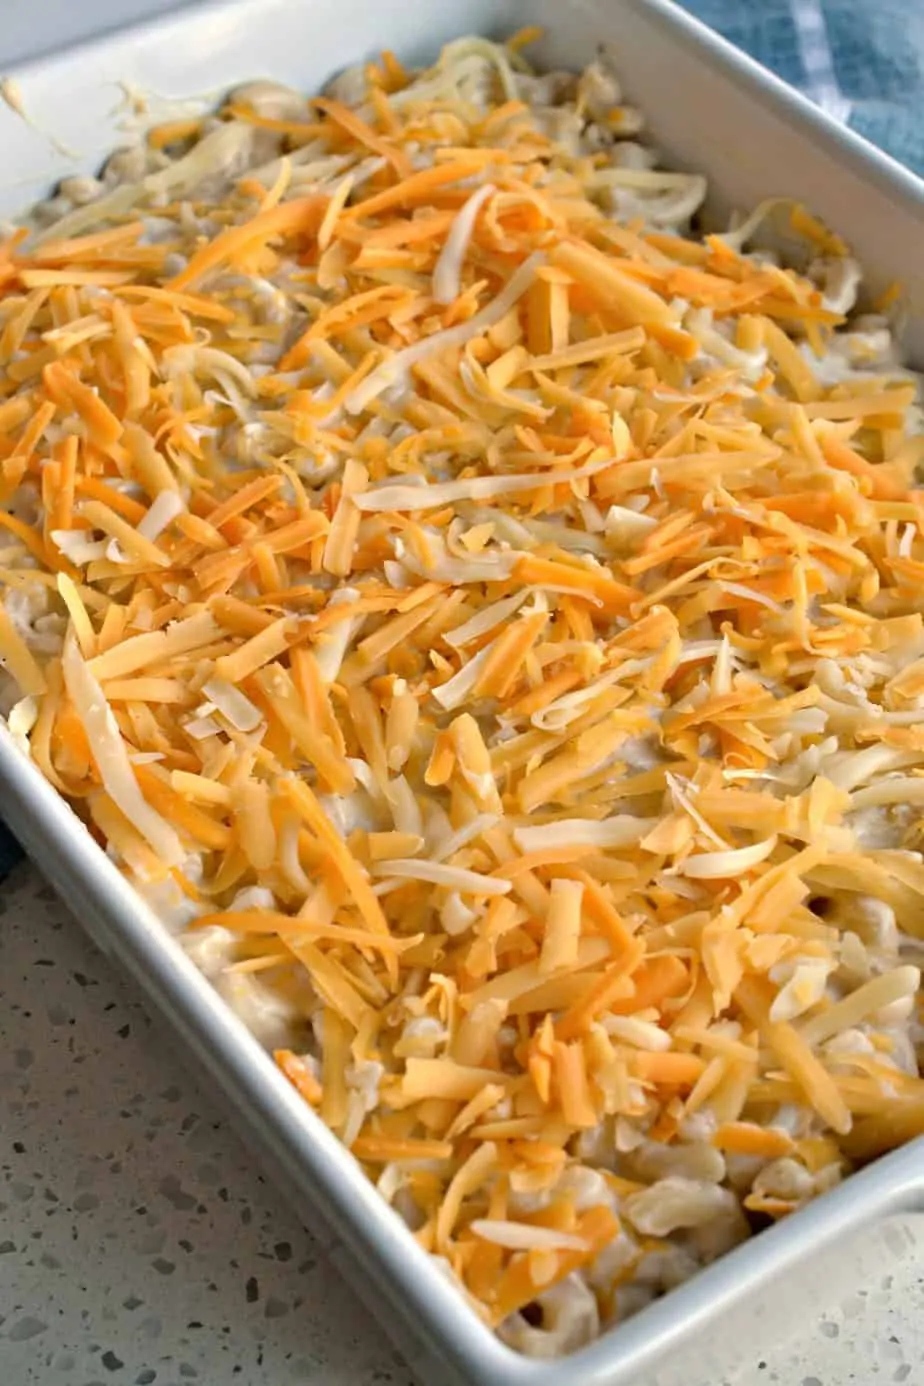 Skip the box stuff and make your family the creamiest dreamiest baked macaroni and cheese ever.